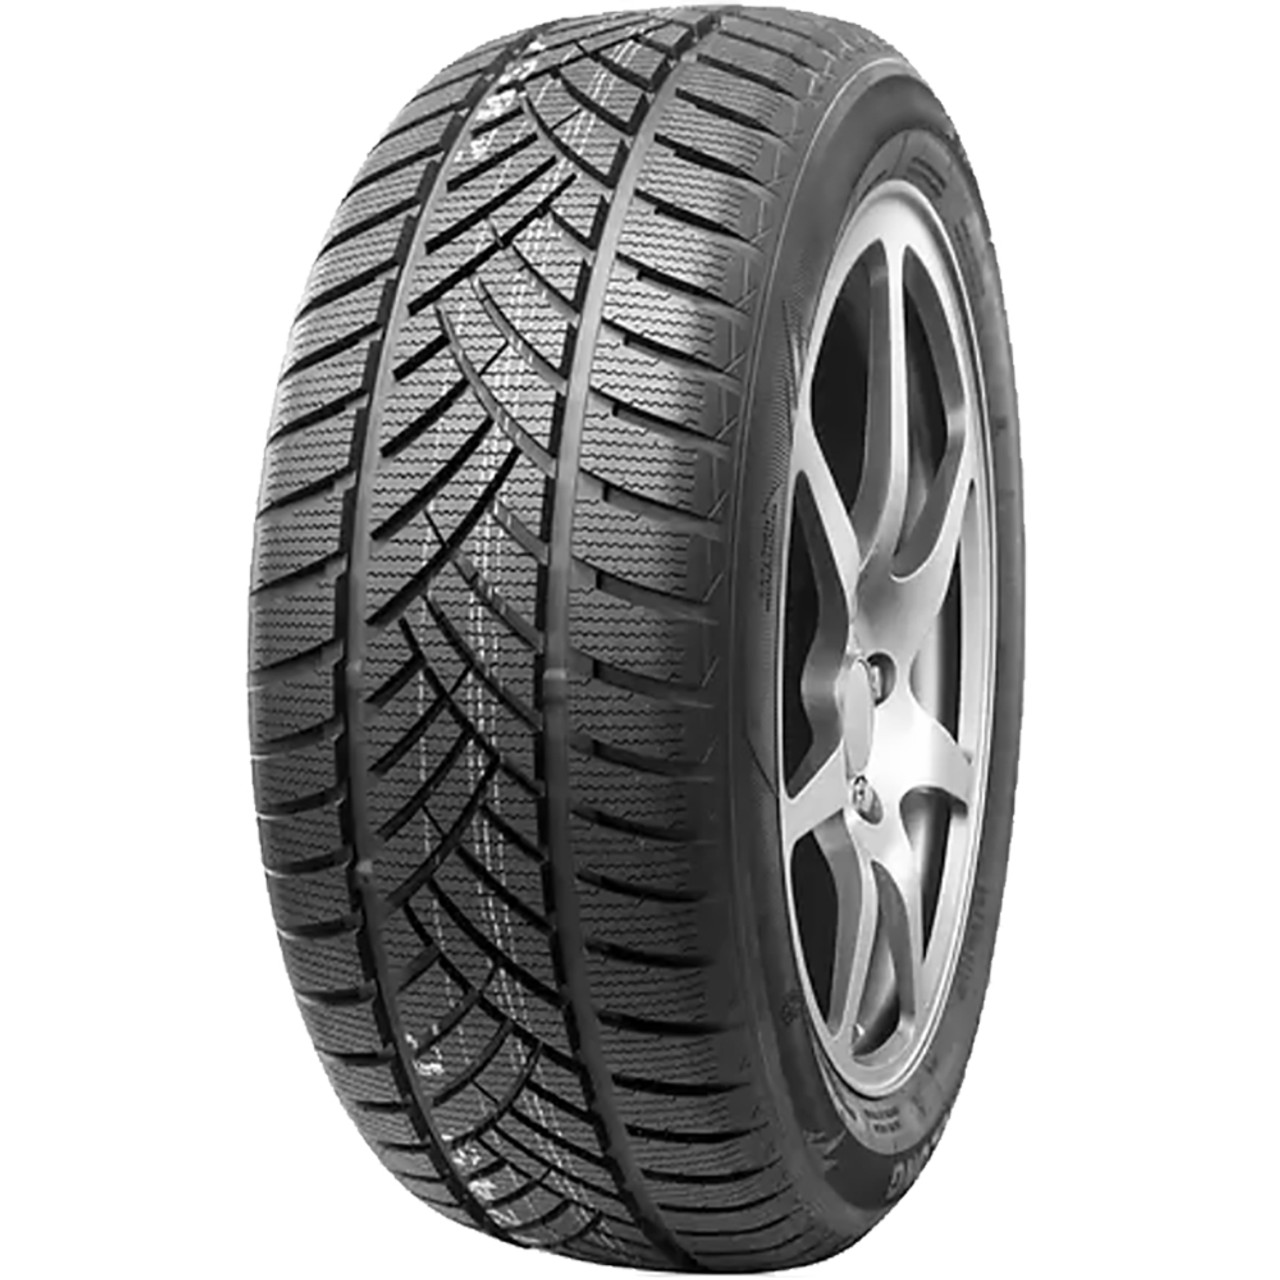 Gomme Nuove Leao 215/55 R16 97H WINT.DEFENDER HP M+S pneumatici nuovi Invernale